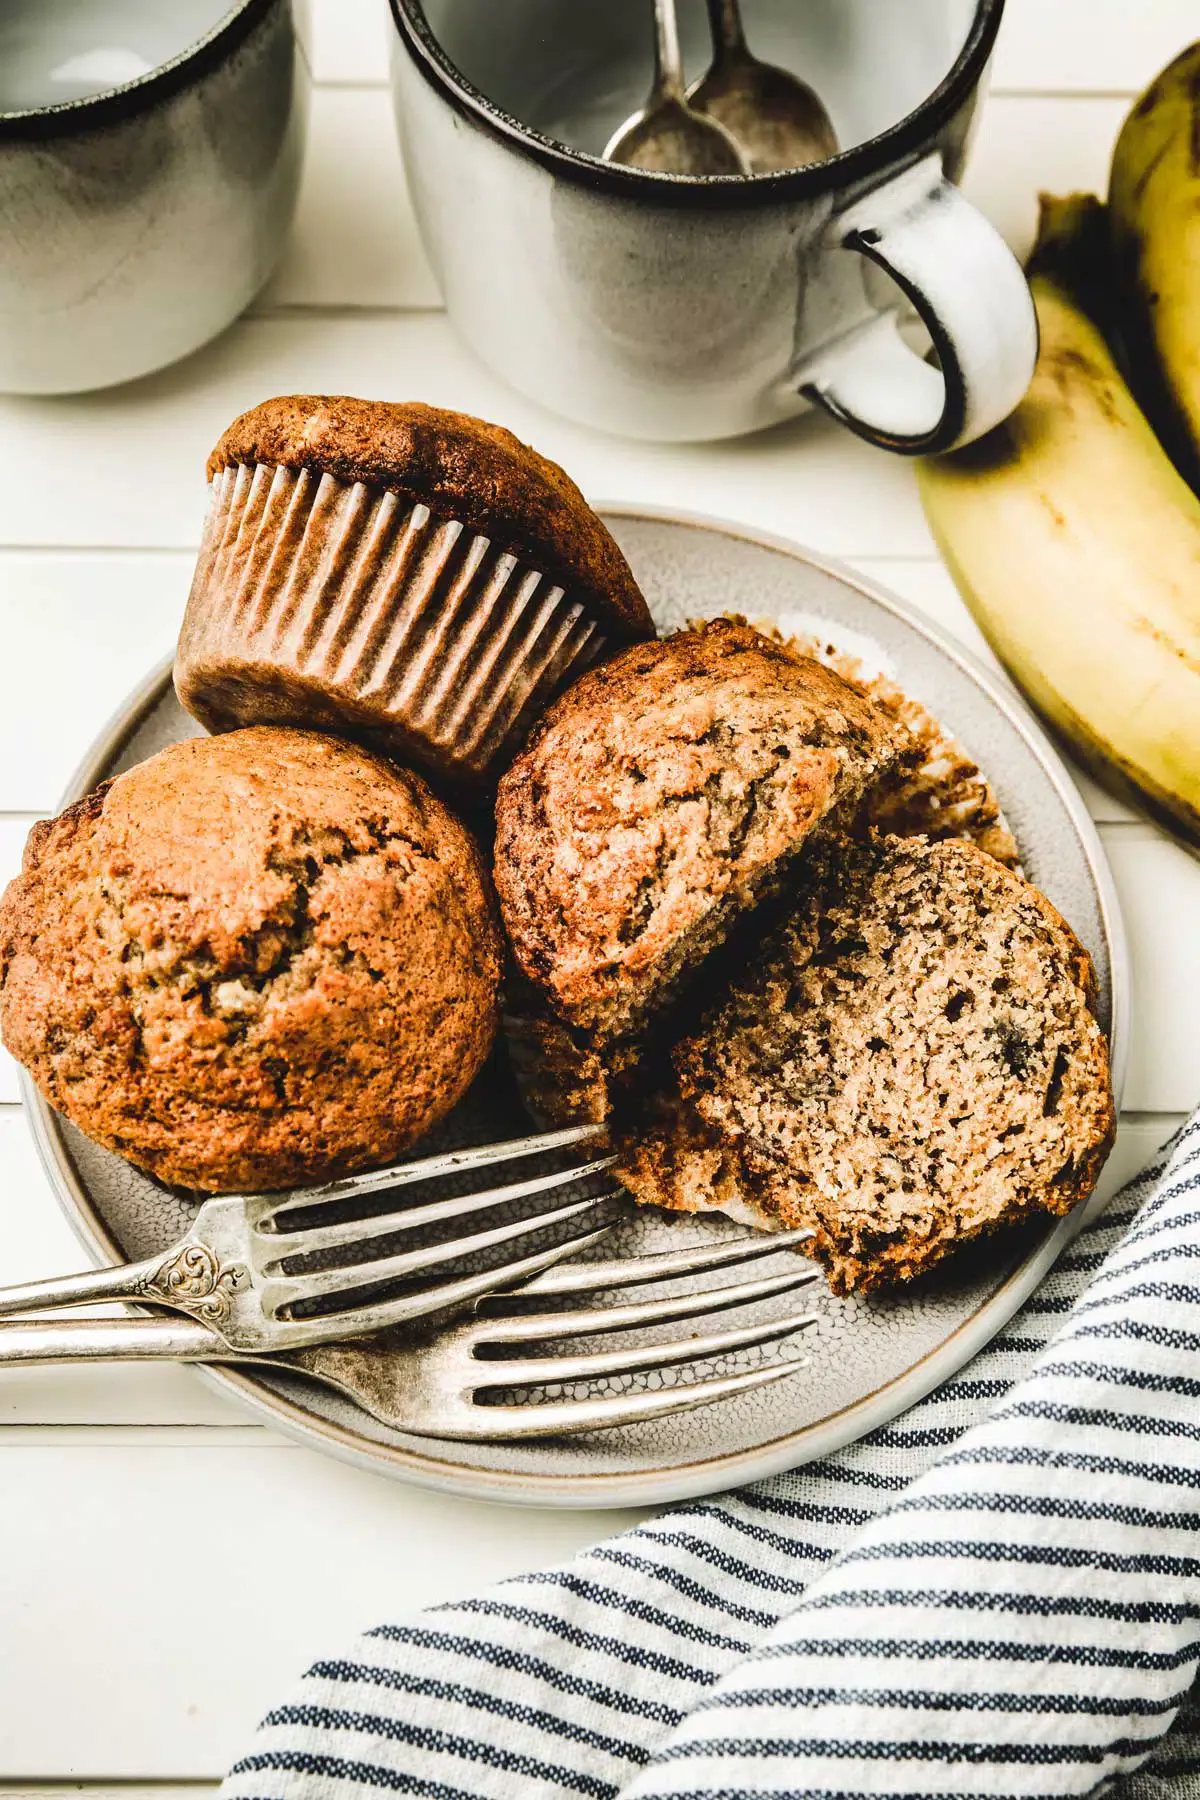 Banana muffins on a plate with forks